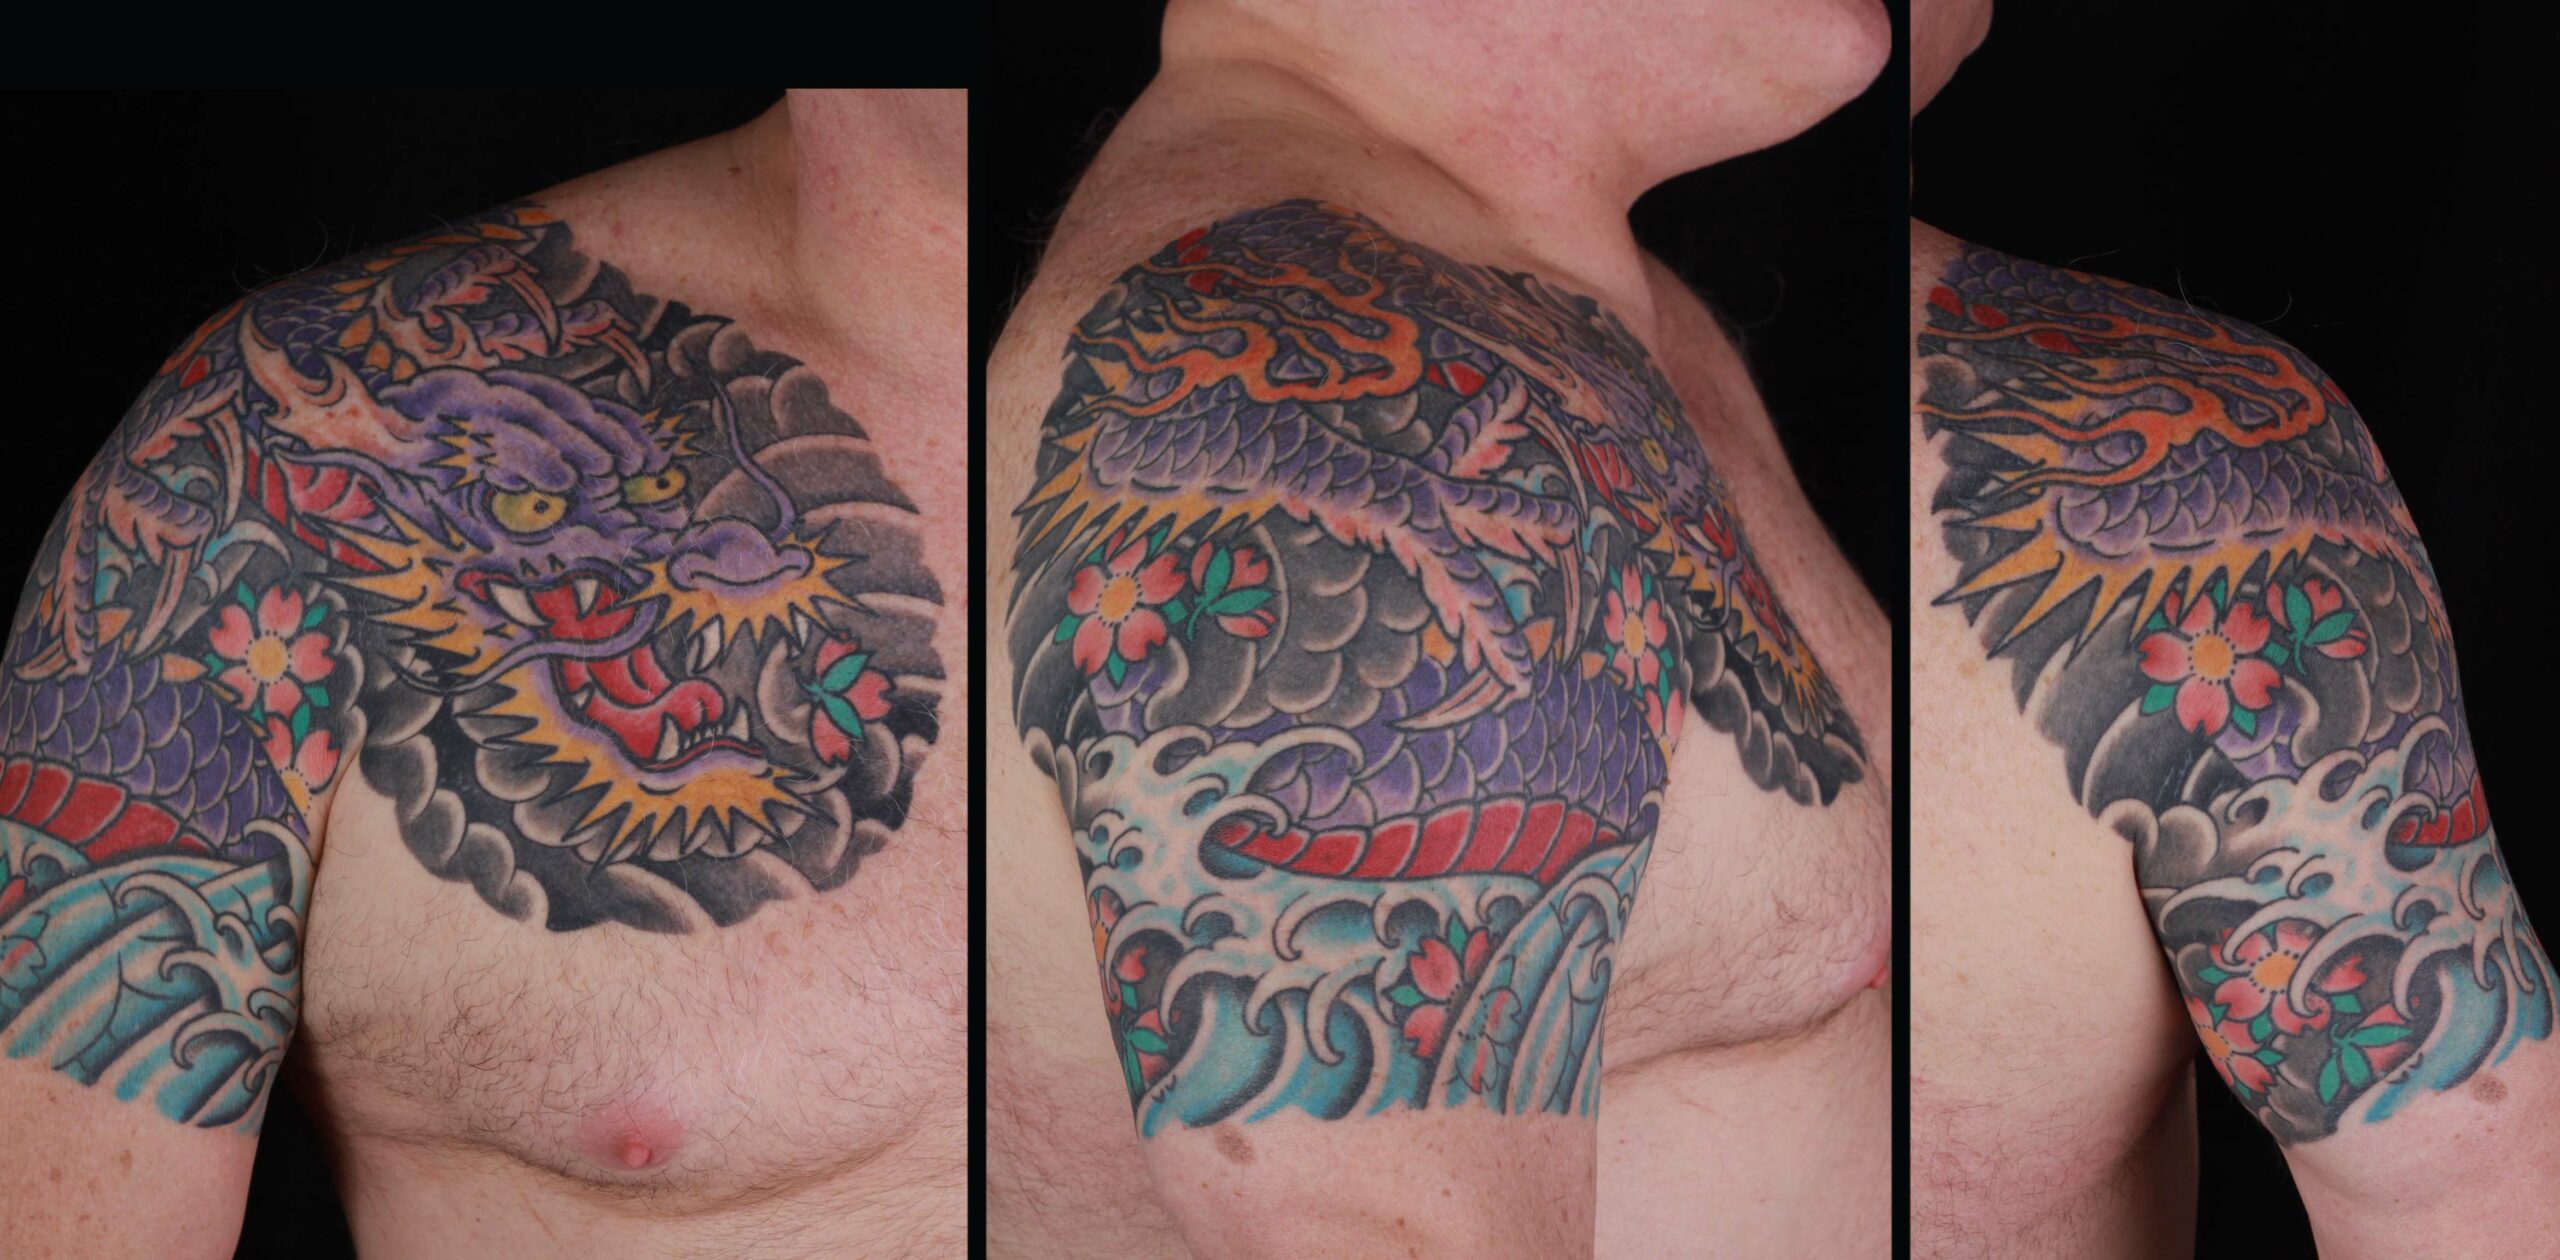 brian-thurow-dedication-tattoo-japanese-dragon-water-waves-cherry-blossoms-arm-chest